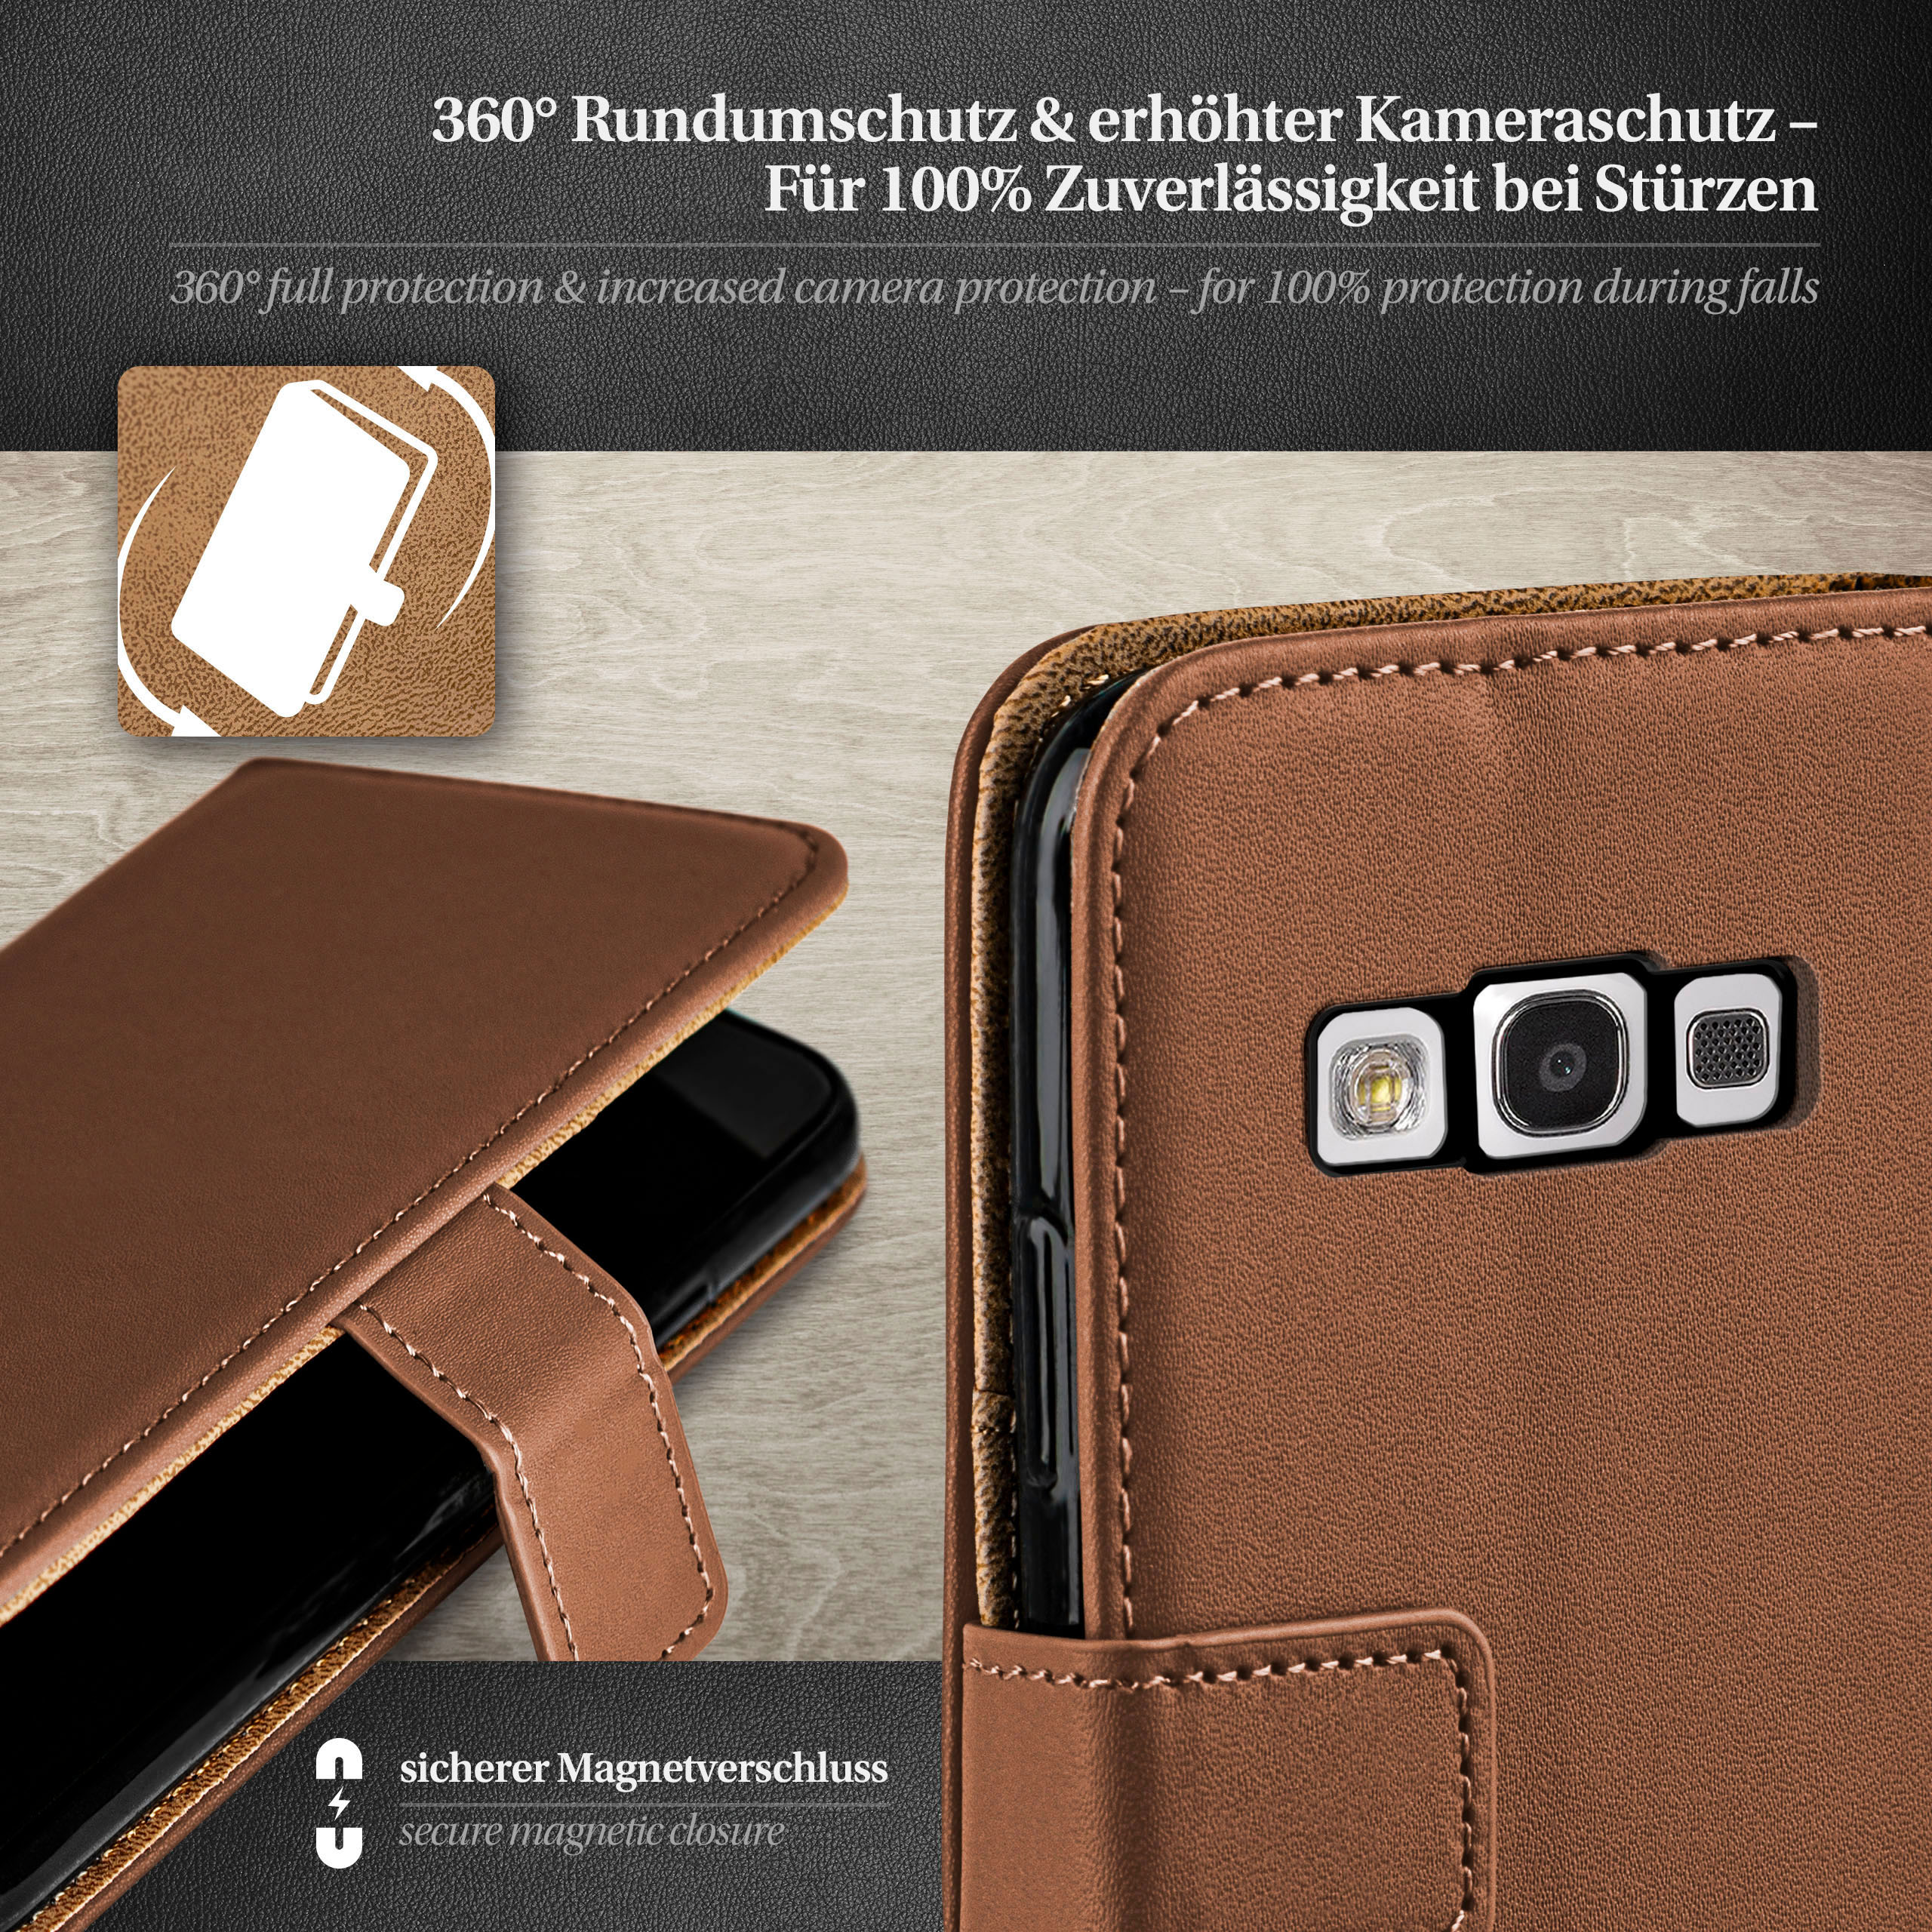 Umber-Brown MOEX Bookcover, Case, Book / Samsung, Neo, Galaxy S3 S3